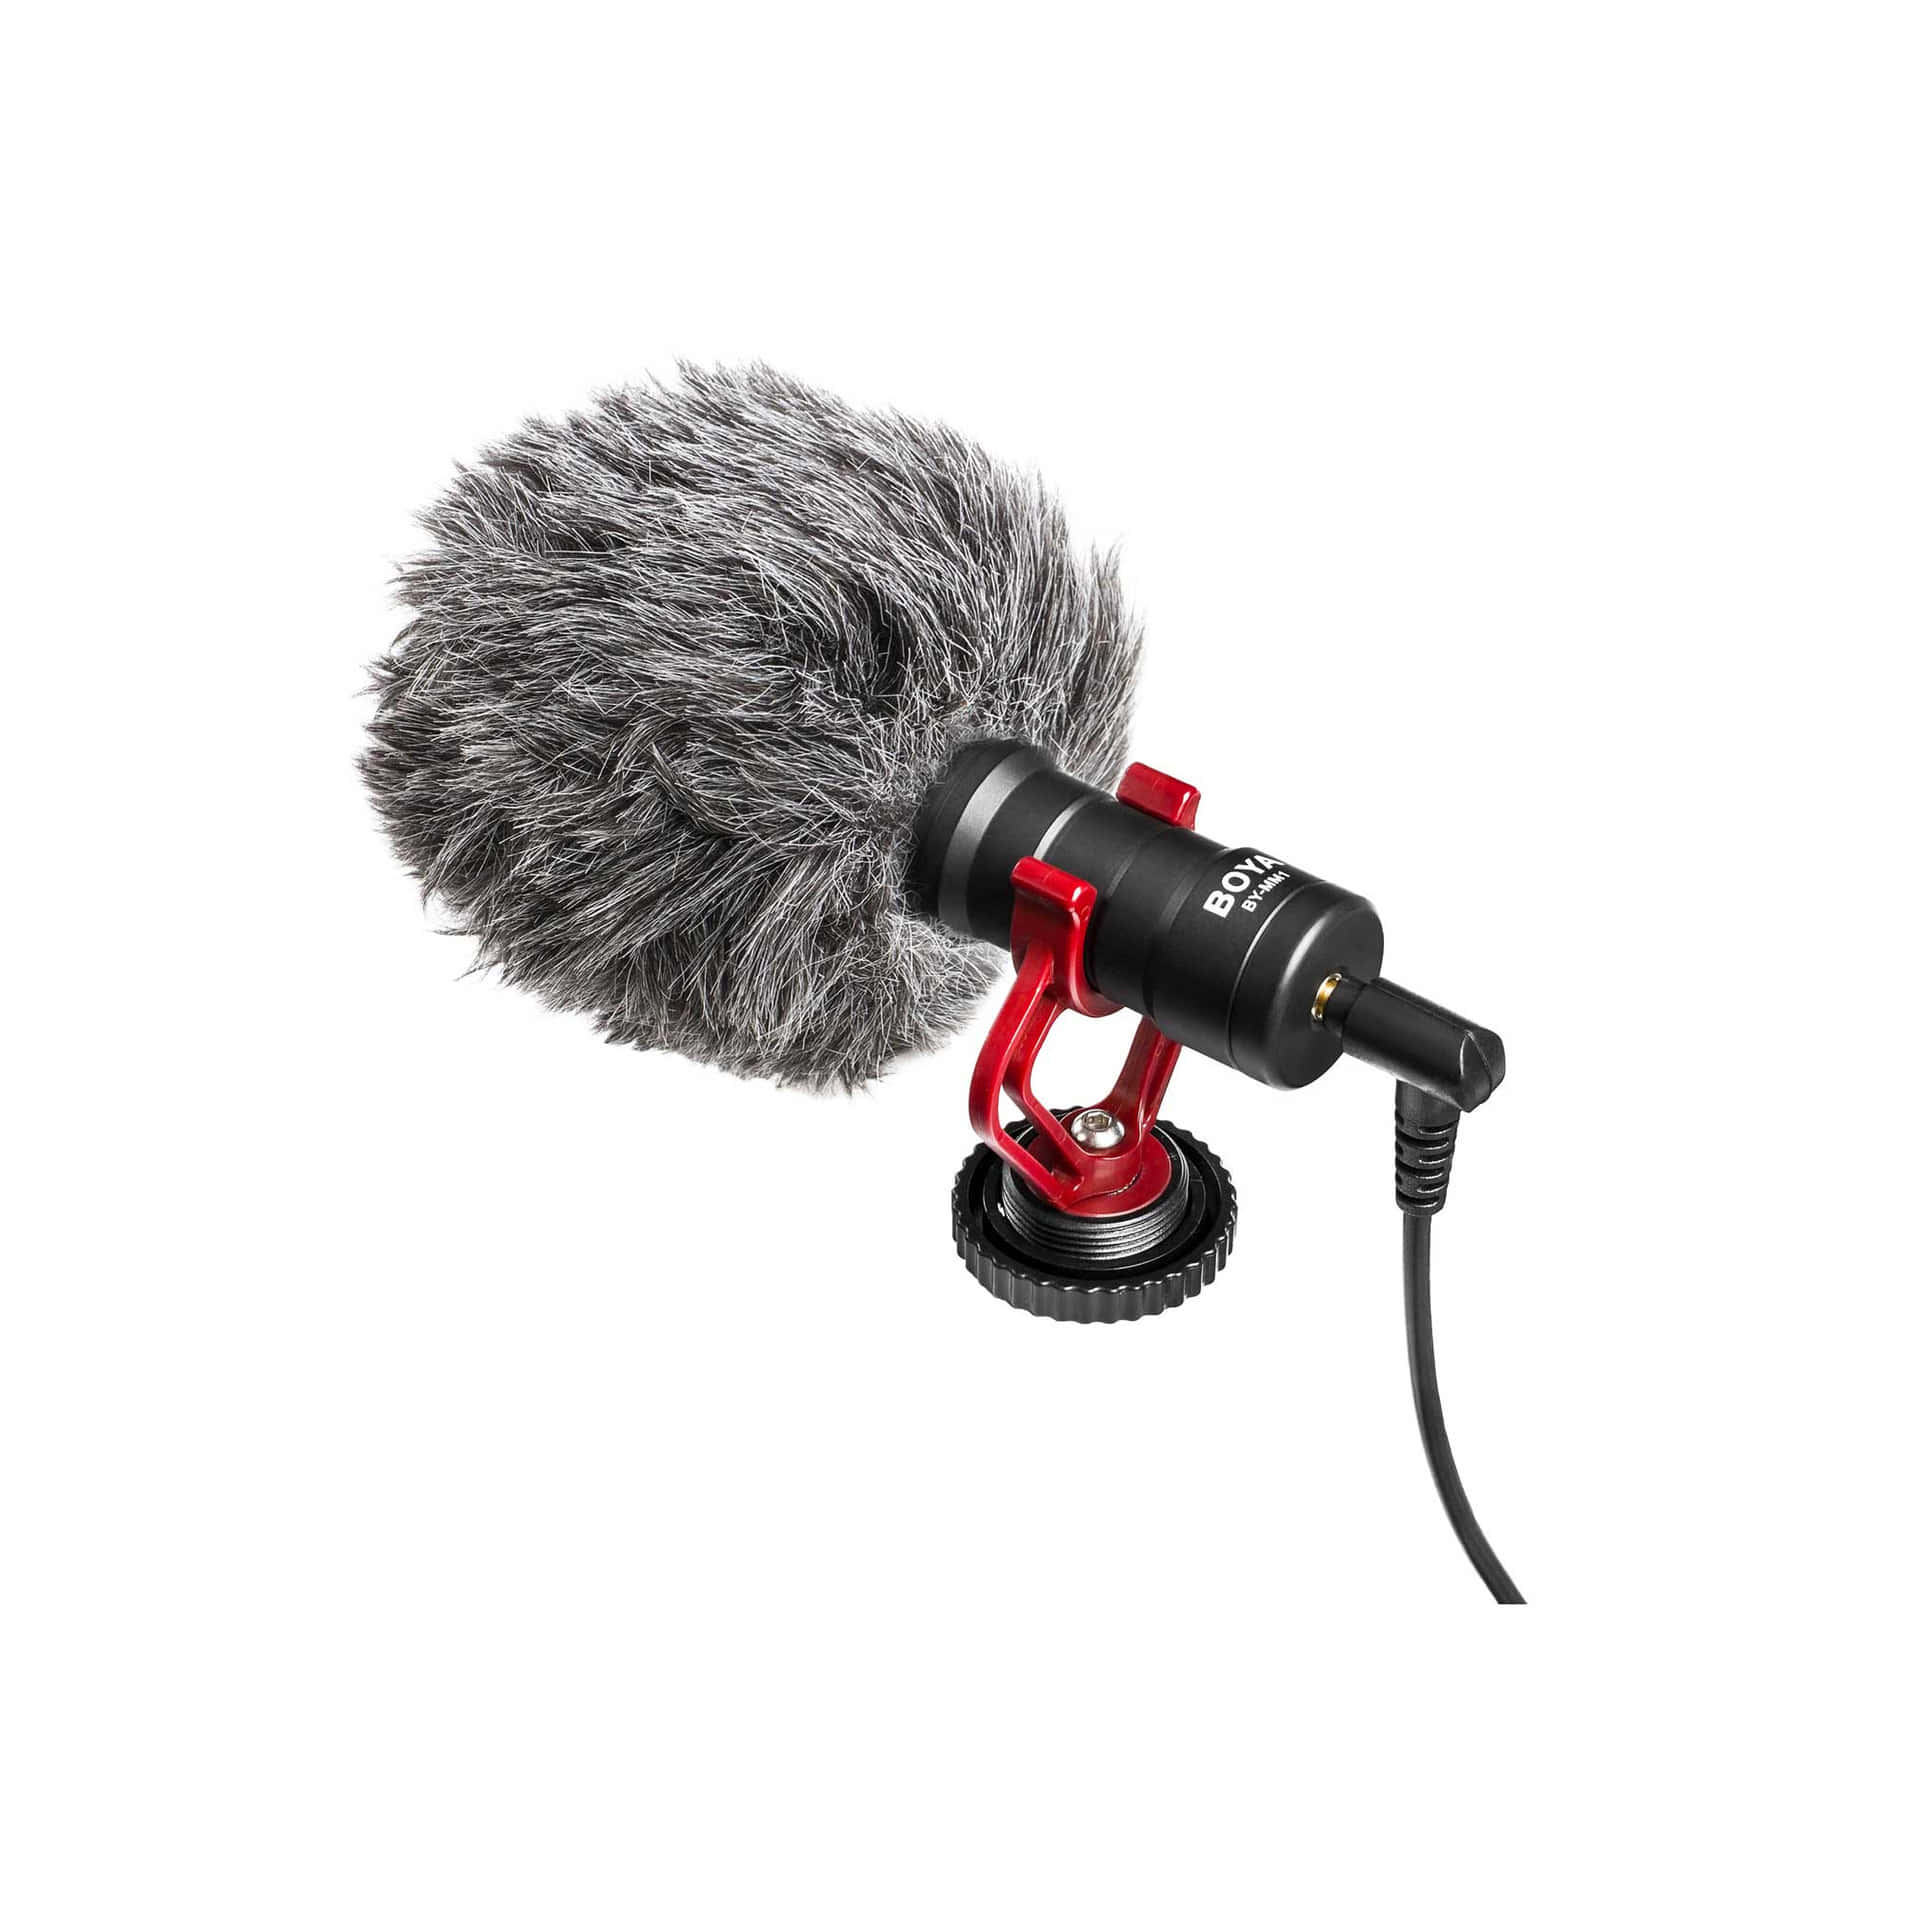 A Microphone With A Microphone Attached To It